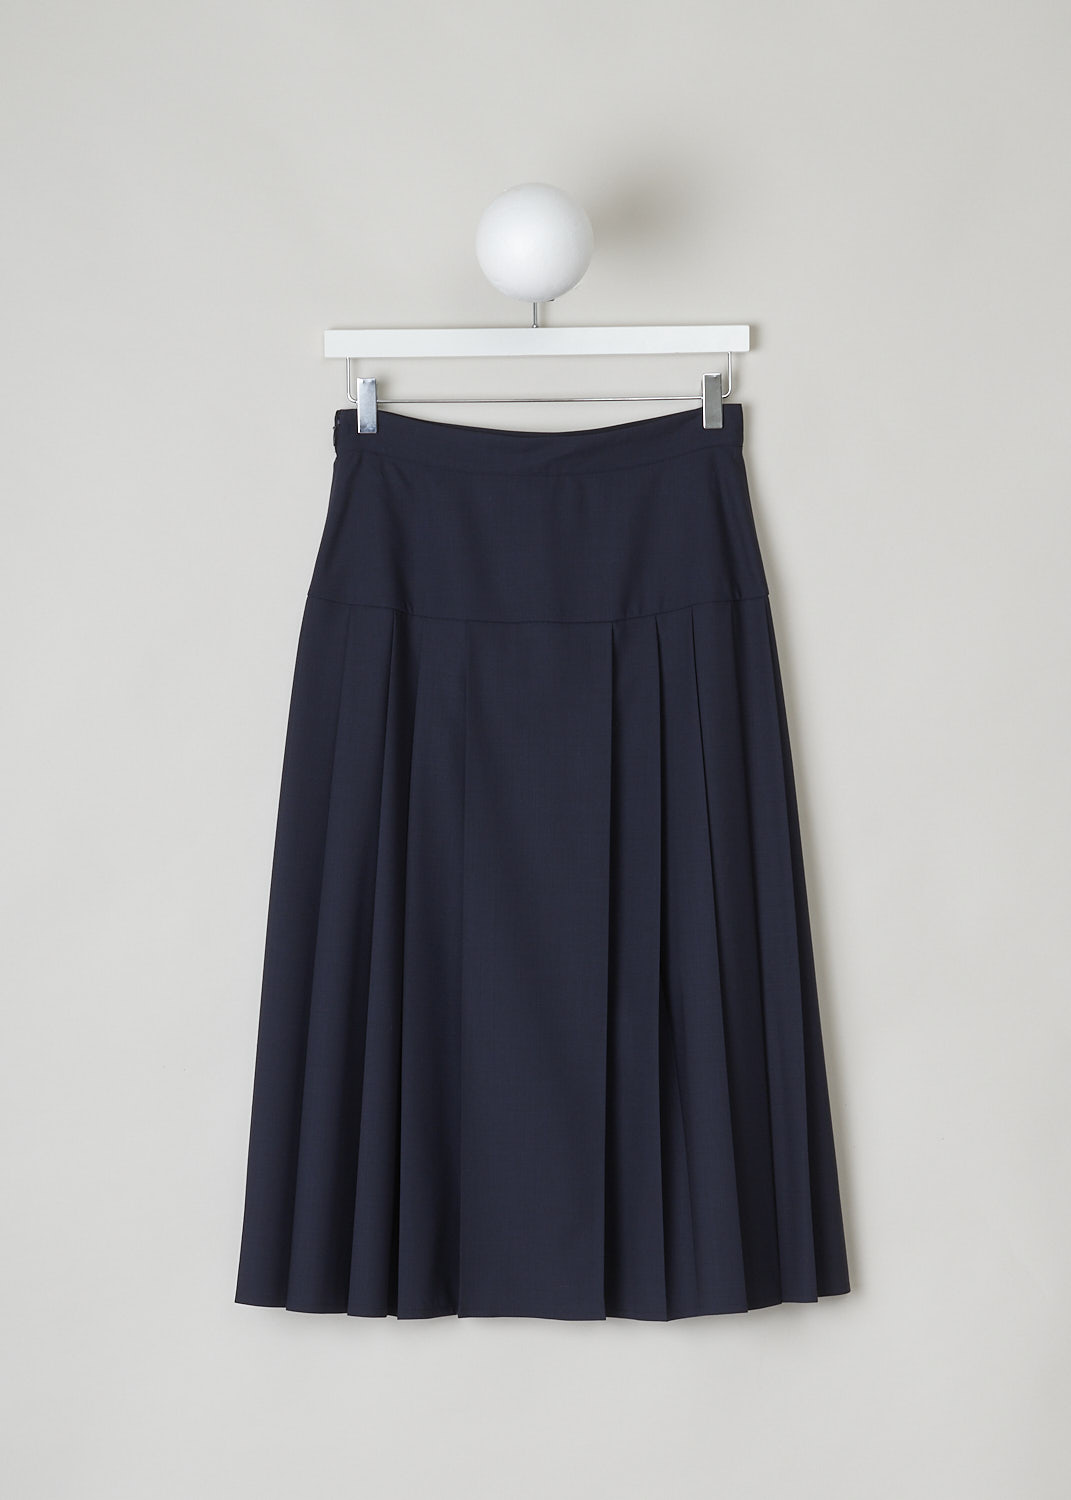 ASPESI, NAVY BLUE PLEATED MIDI SKIRT, 2207_G286_01098, Blue, Back, This navy blue wool-blend midi skirt has a broad waistband and pleats along the sides. The skirt has a straight hemline. A concealed zipper in the side seam functions as the closure option. 
